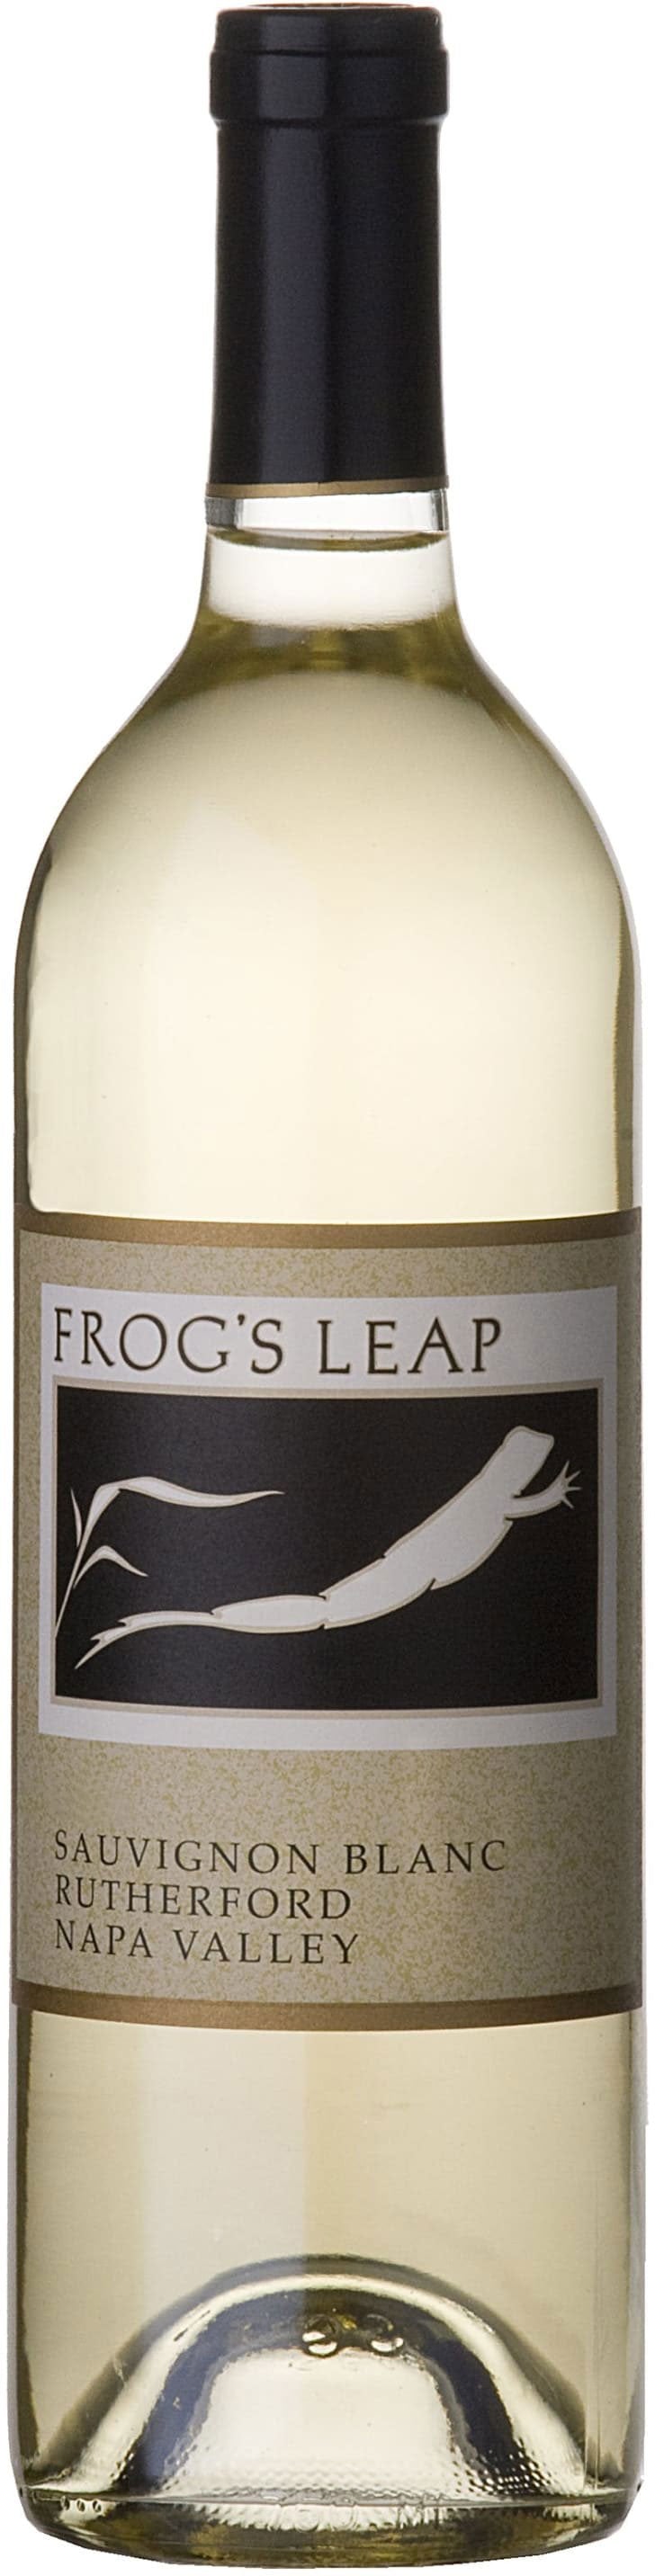 FROGS LEAP SAUVIGNON BLANC RUTHERFORD